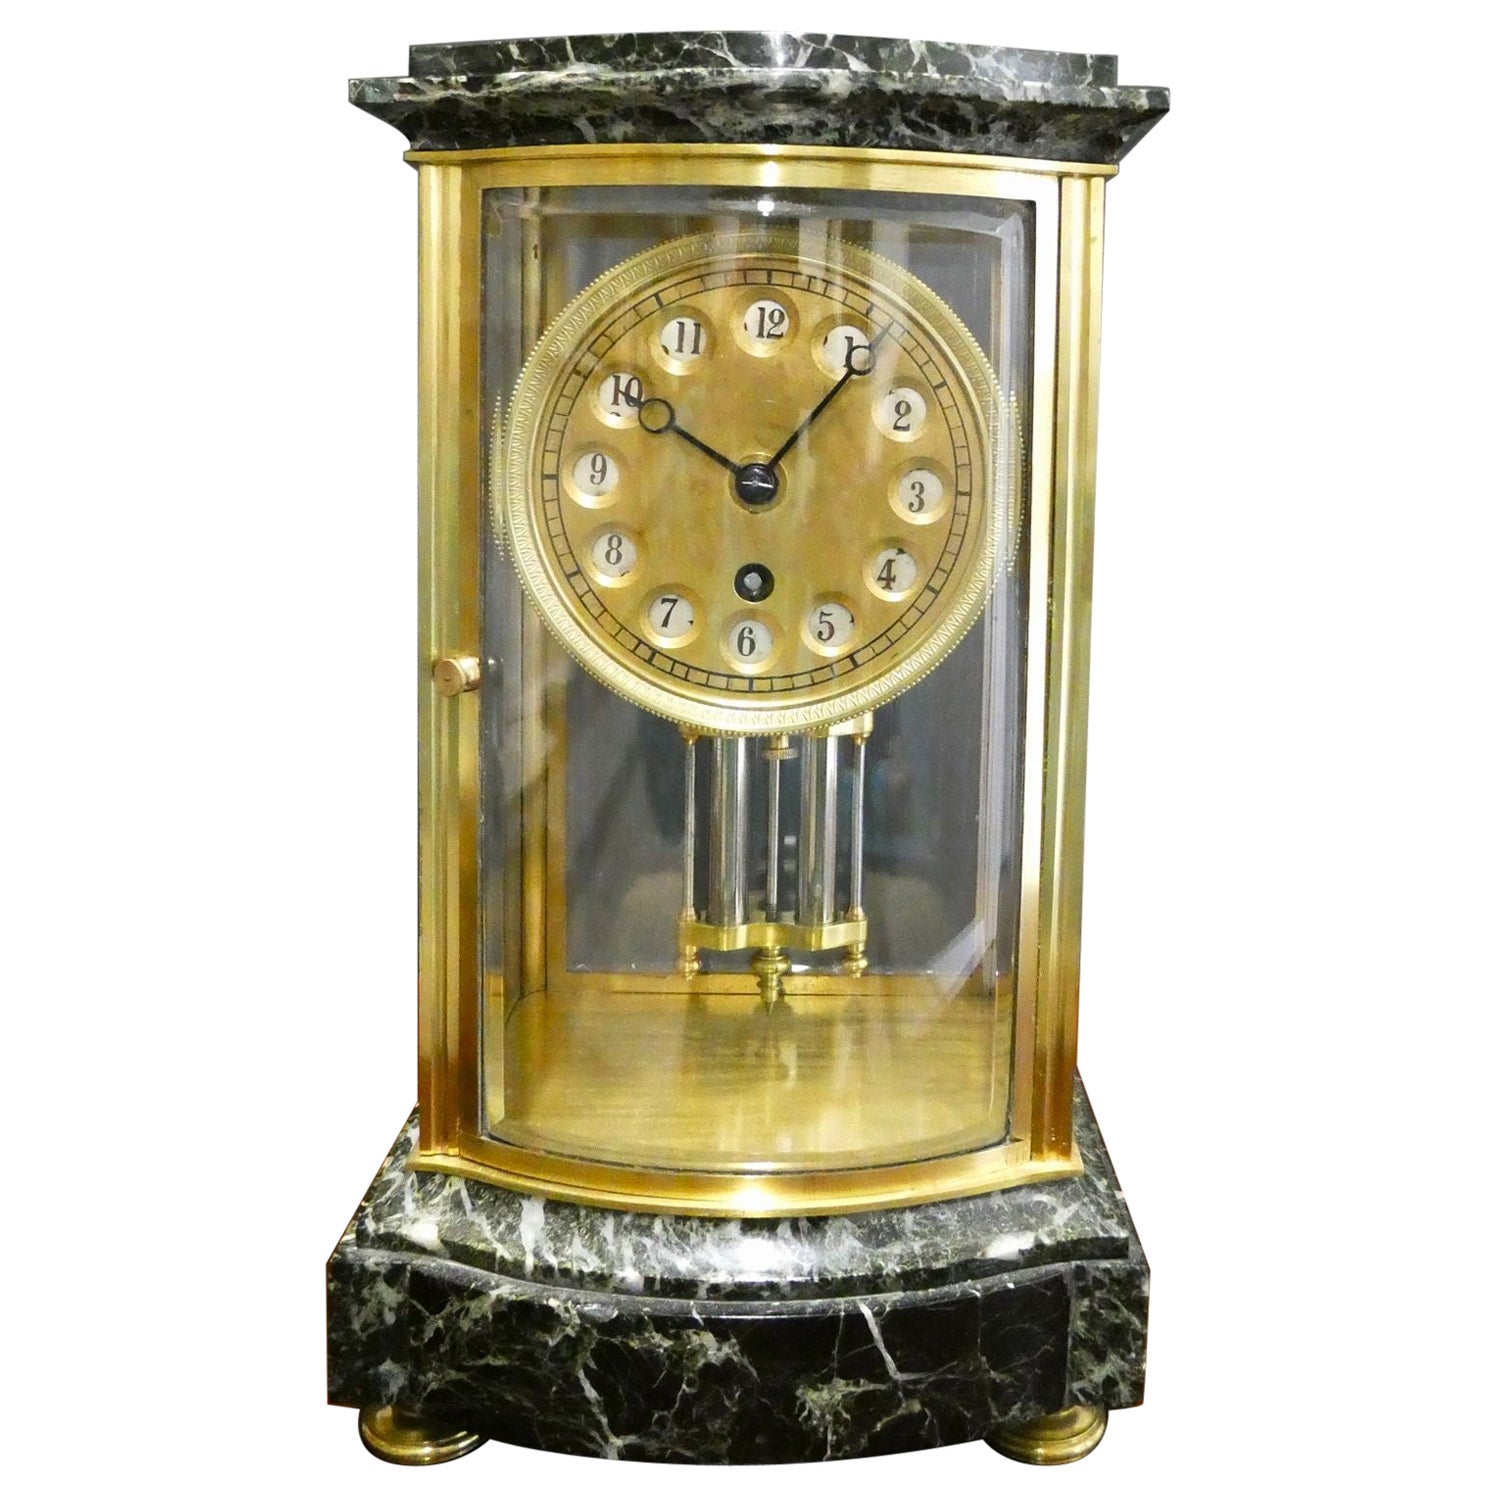 Unusual French 24 Hour Four Glass Mantel Clock